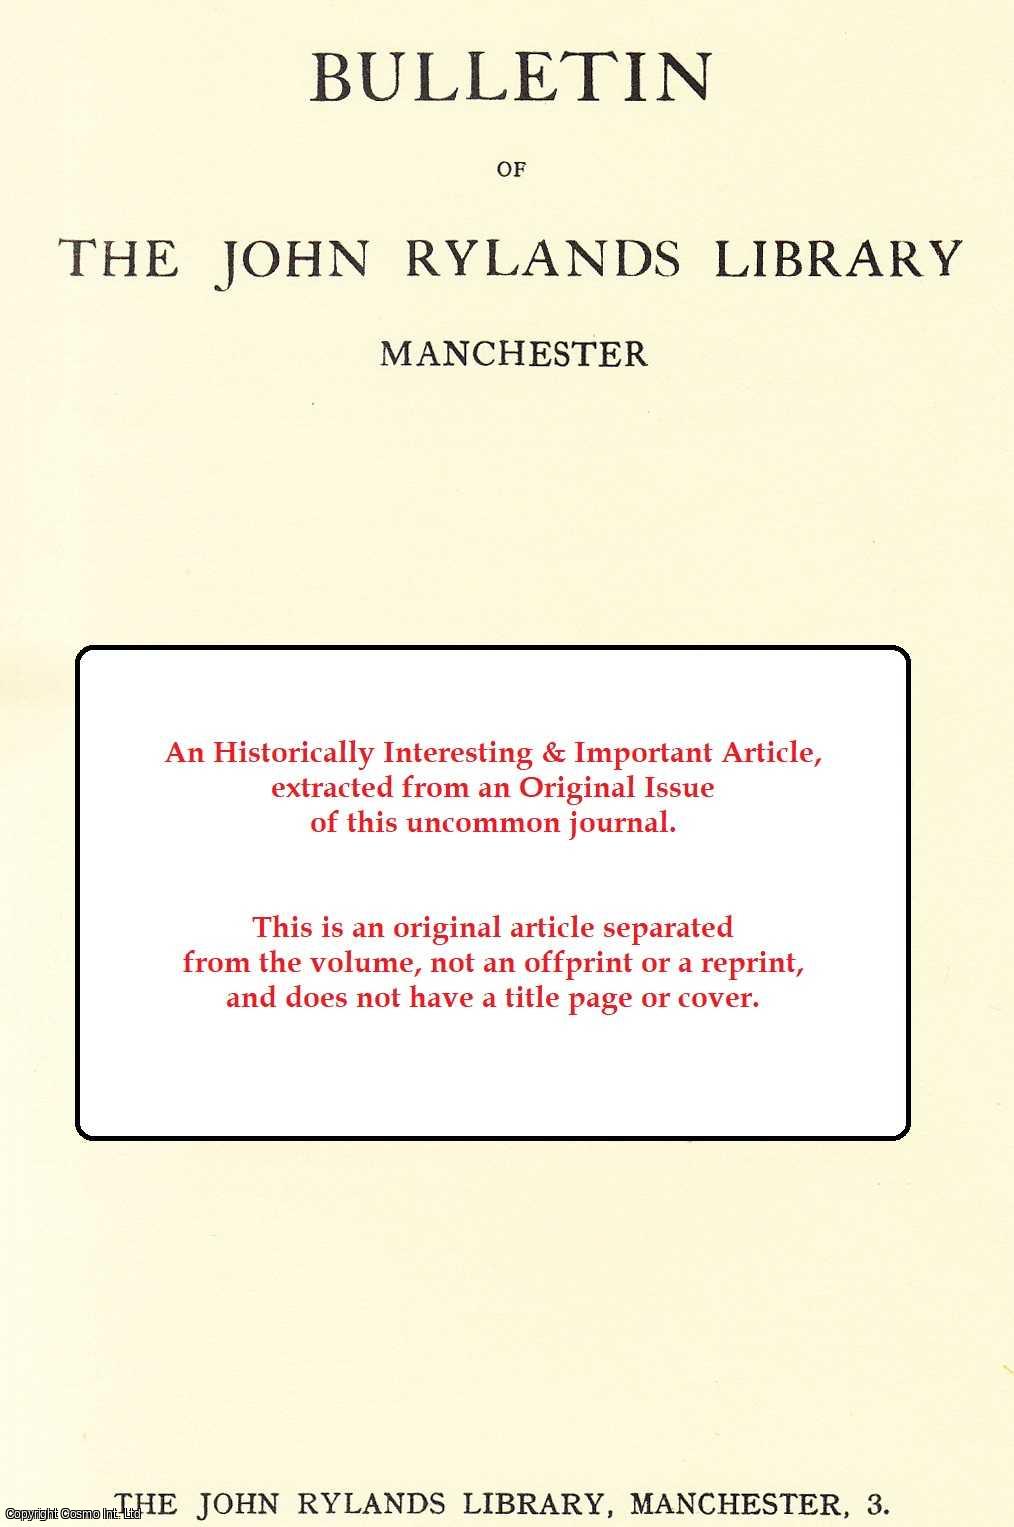 John R. DeBruyn - John Ruskin and Sir Arthur Helps. An original article from the Bulletin of the John Rylands Library Manchester, 1976.